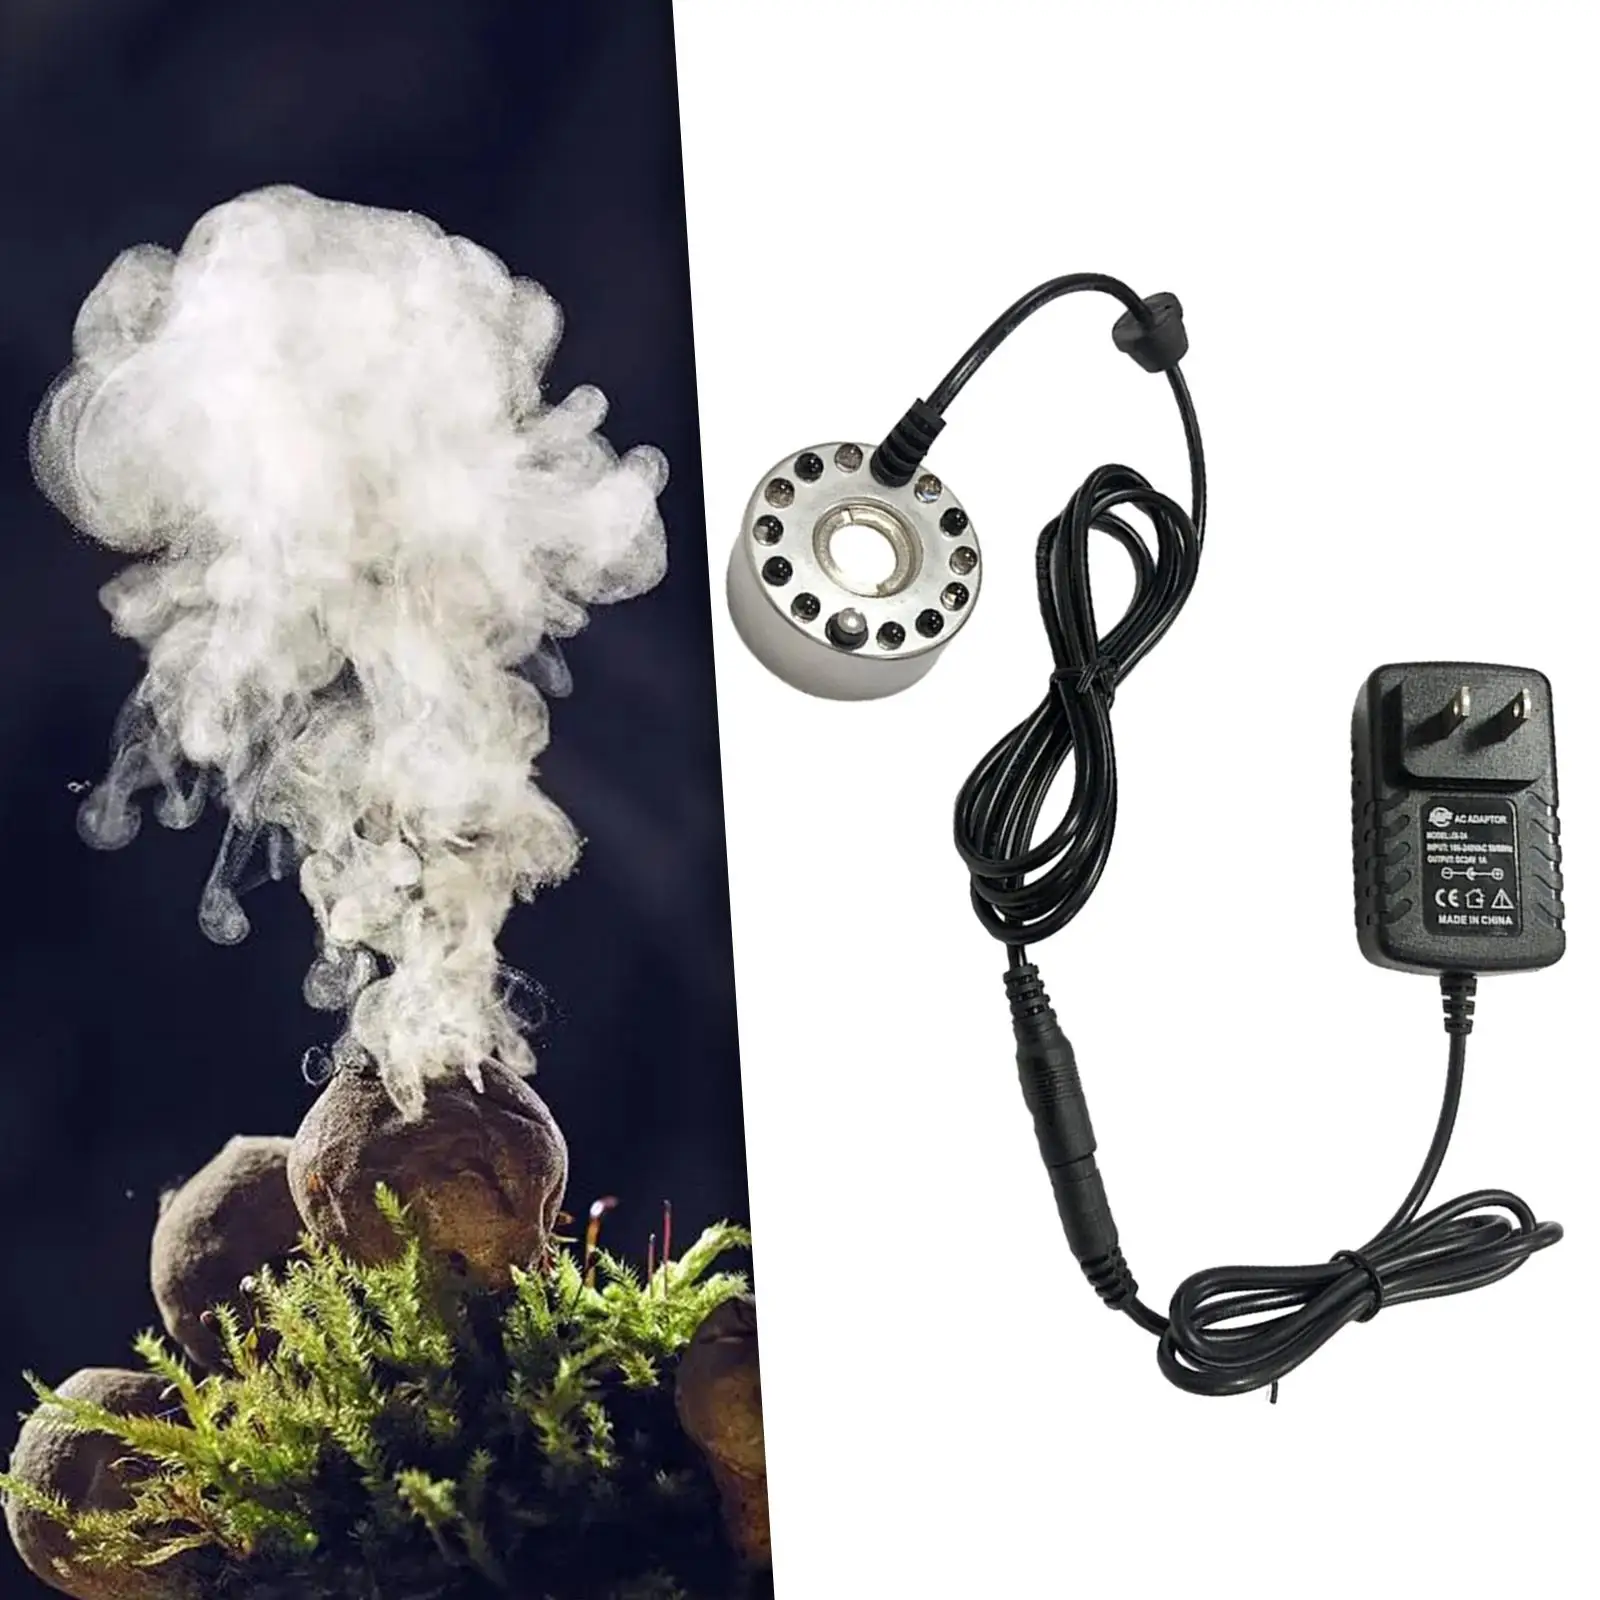 Mist Fogger Mister with Lights US Adapter Plug Accessories Lightweight Multifunctional Pond Fogger for Halloween Christmas